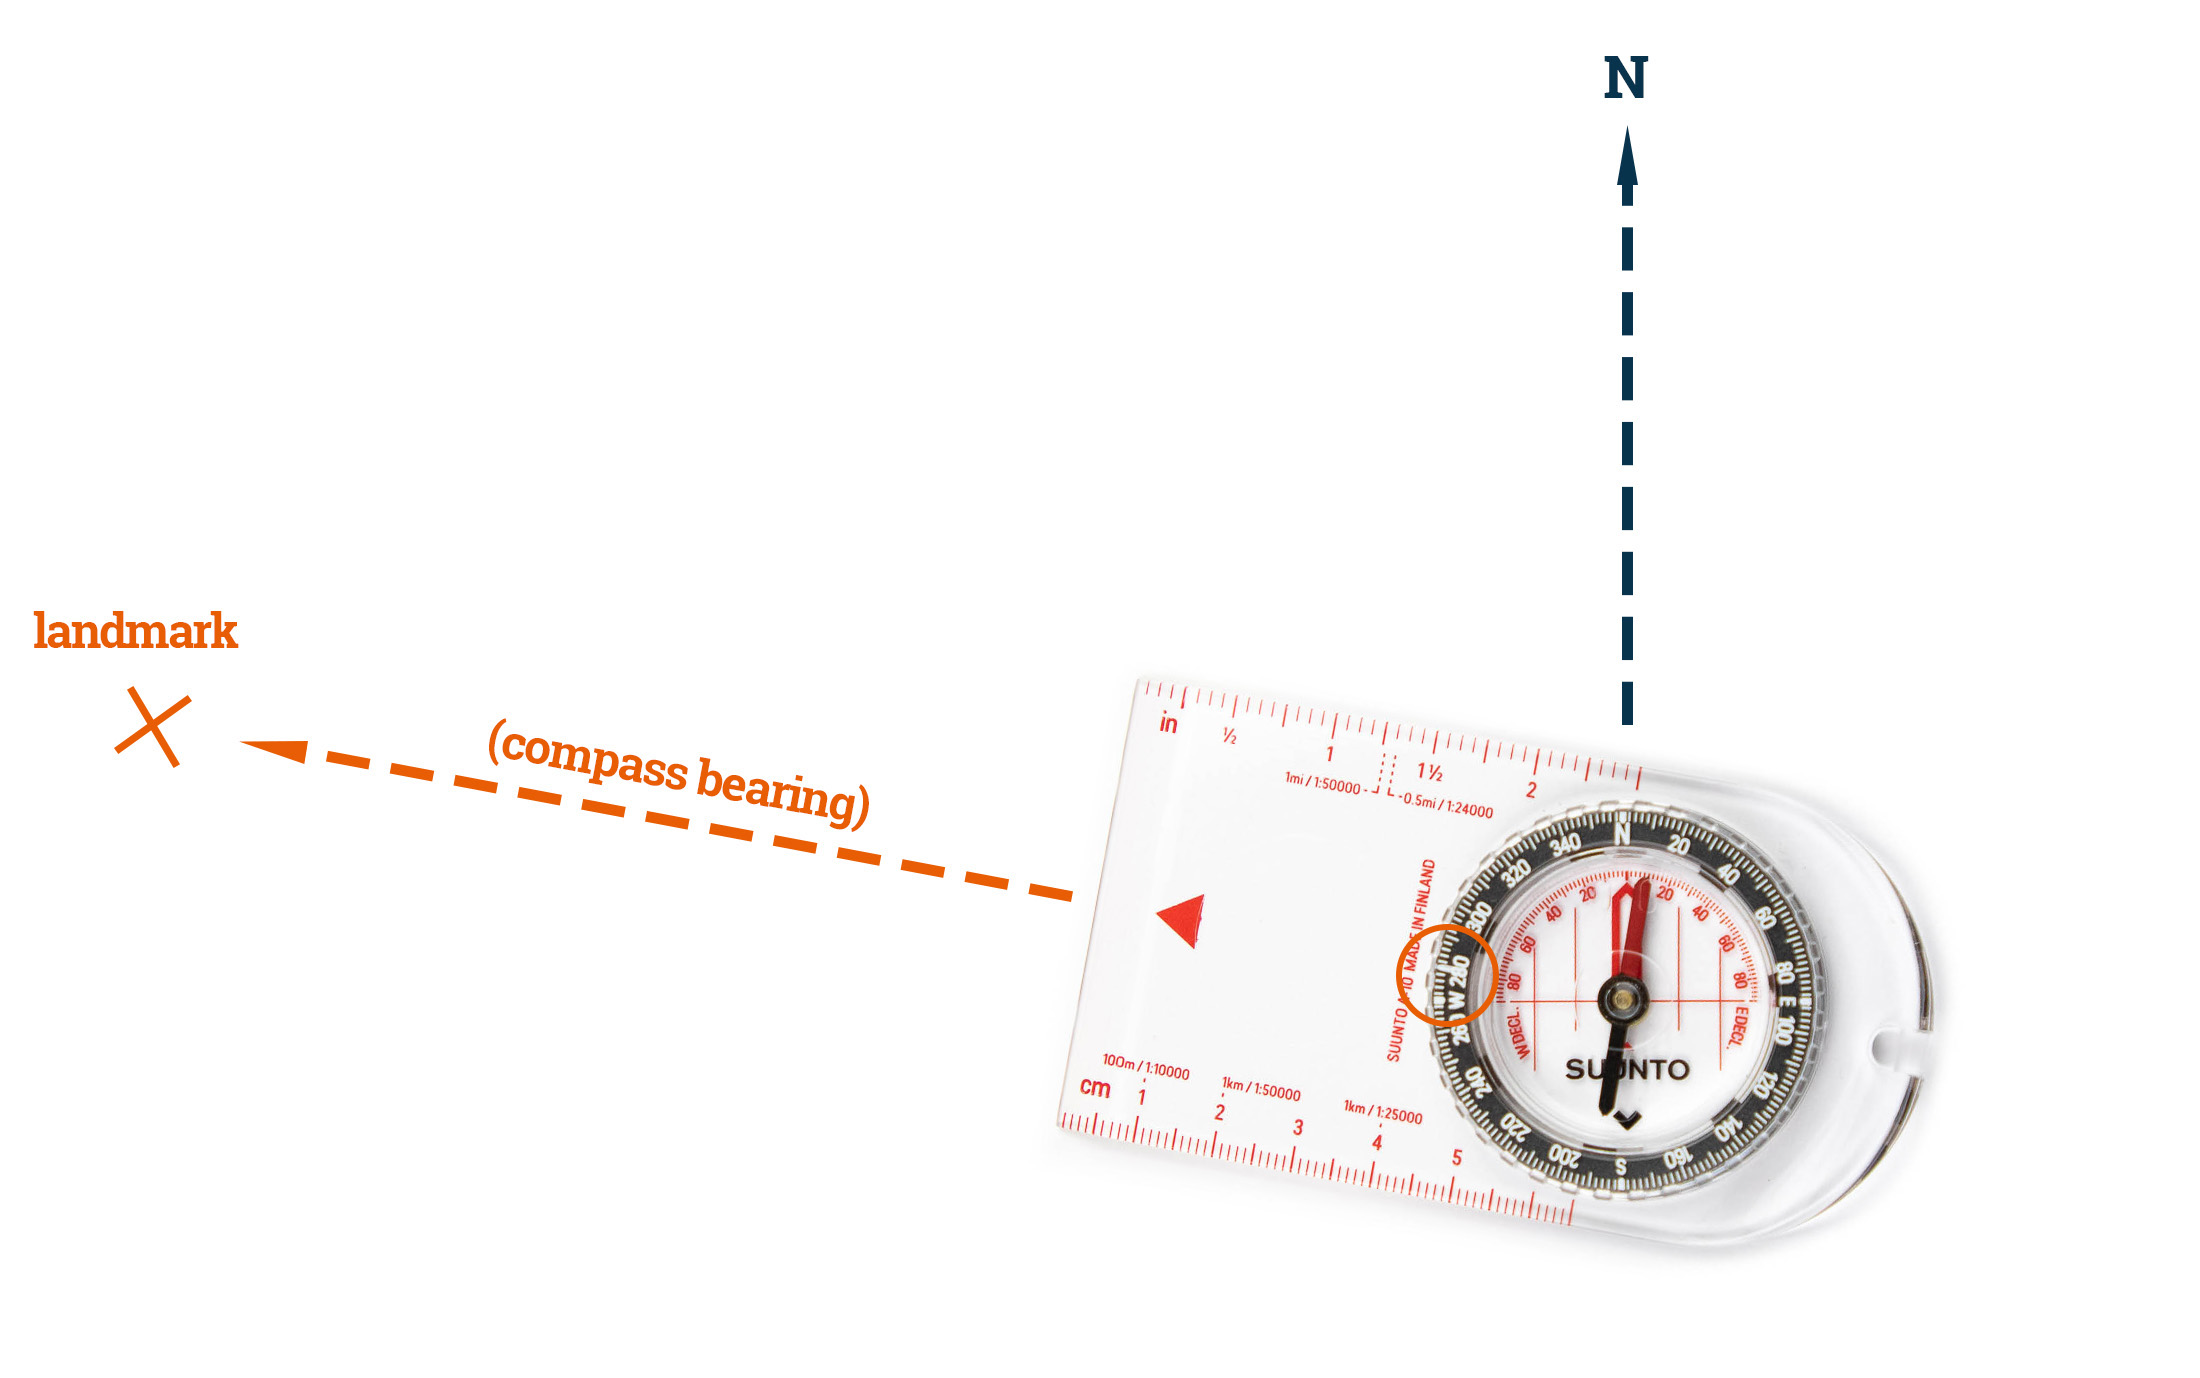 Taking a compass bearing